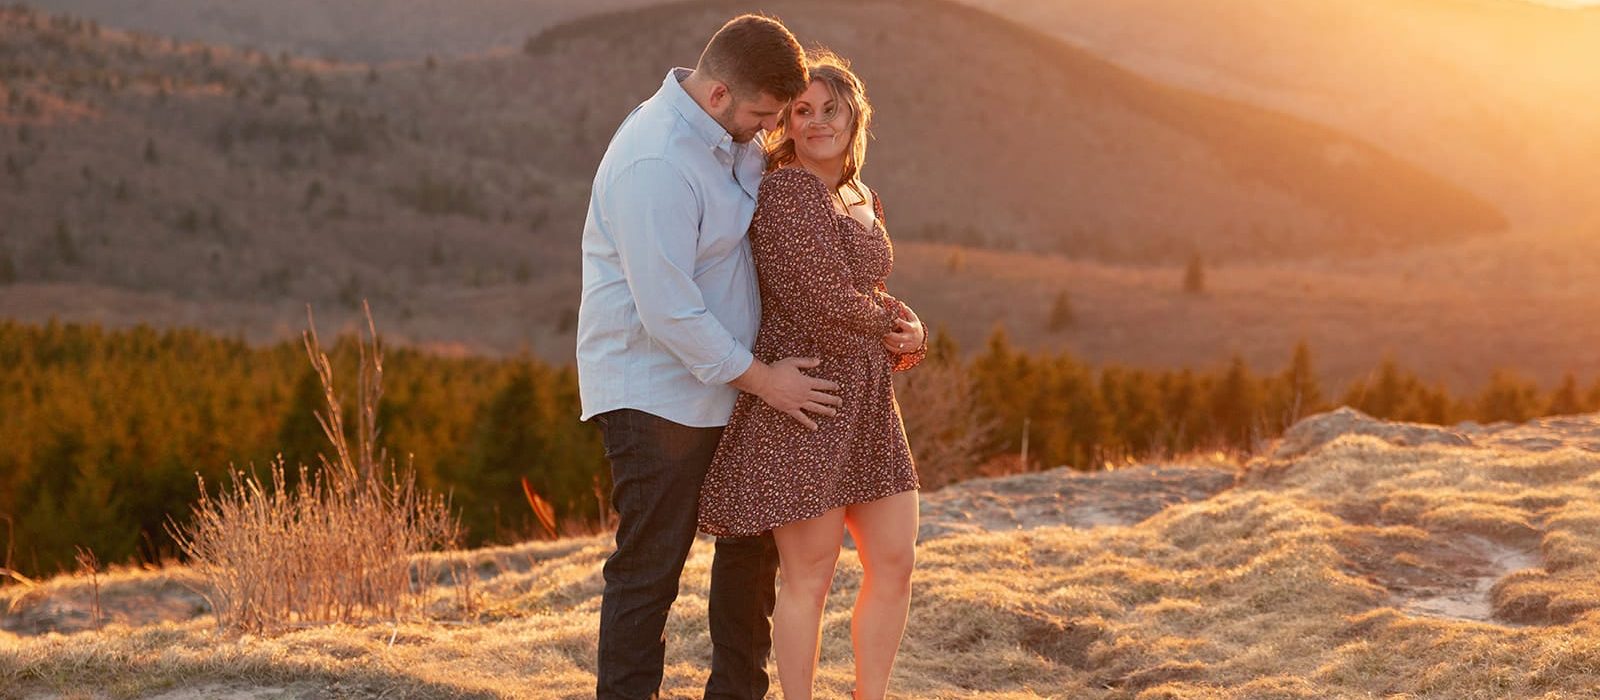 Golden hour engagement photos in asheville nc